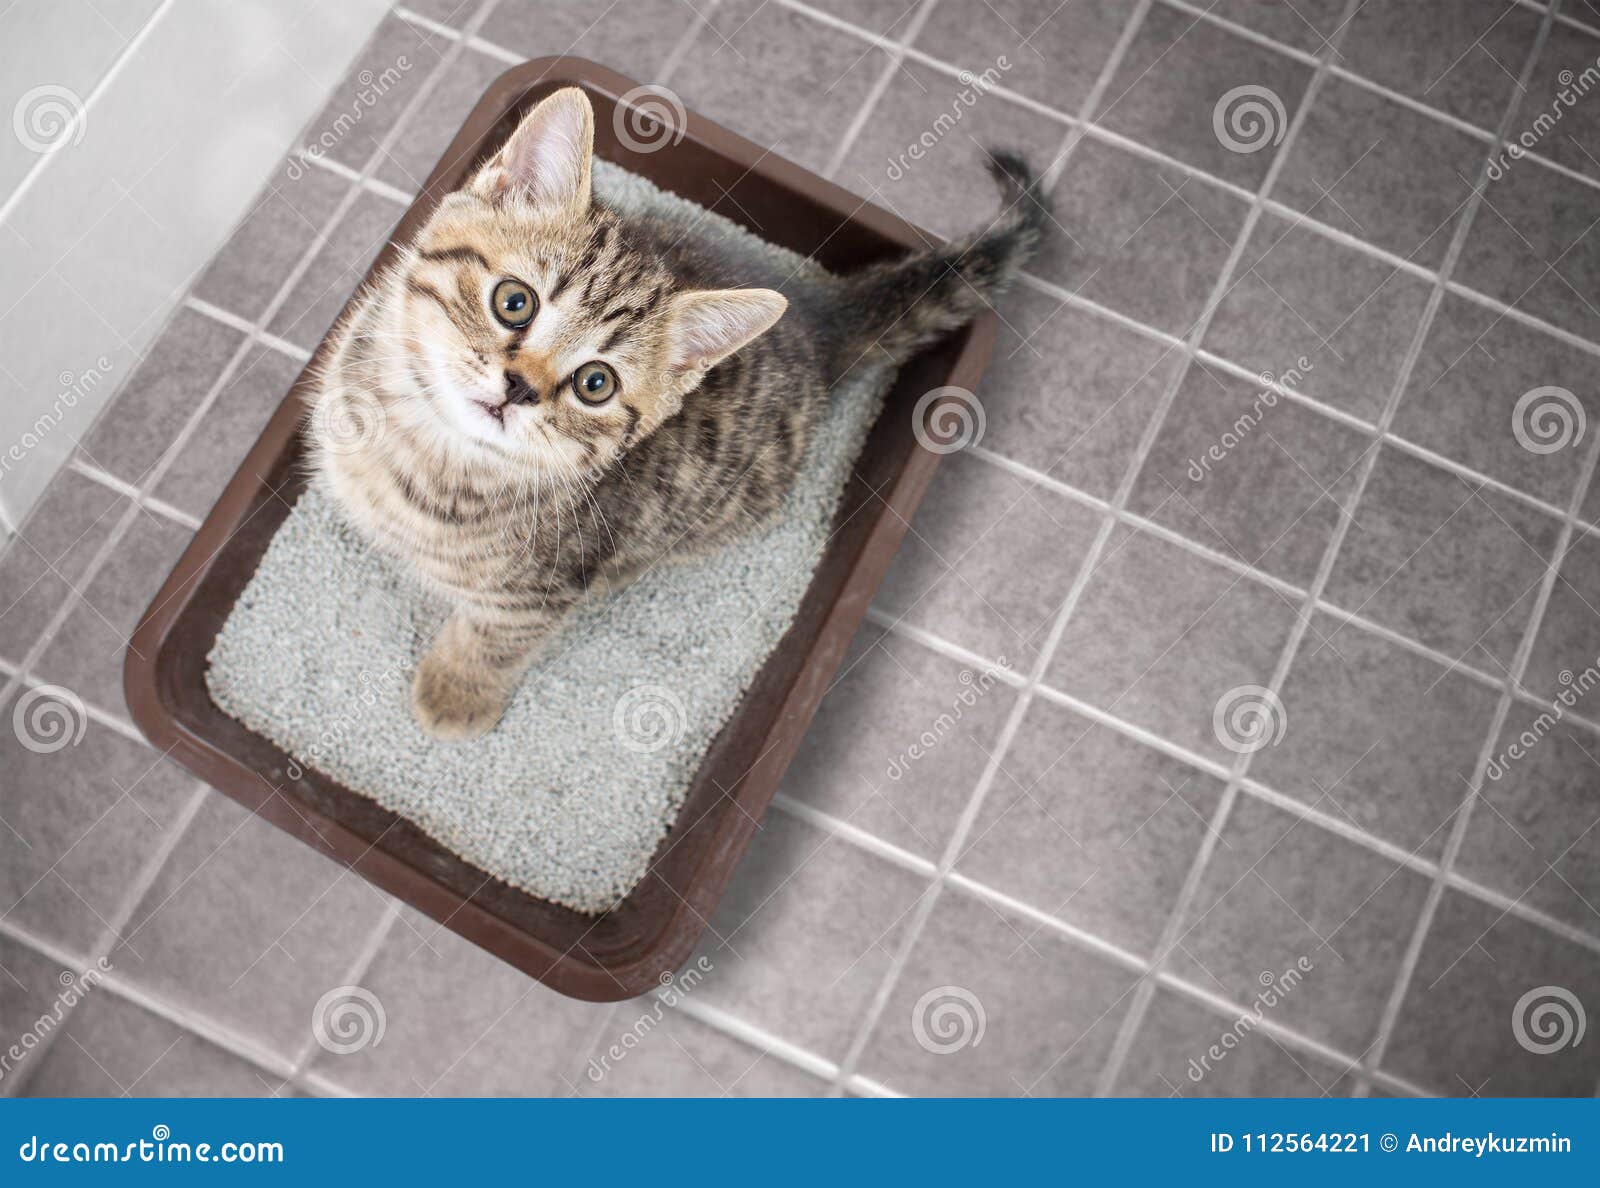 cat top view sitting in litter box with sand on bathroom floor